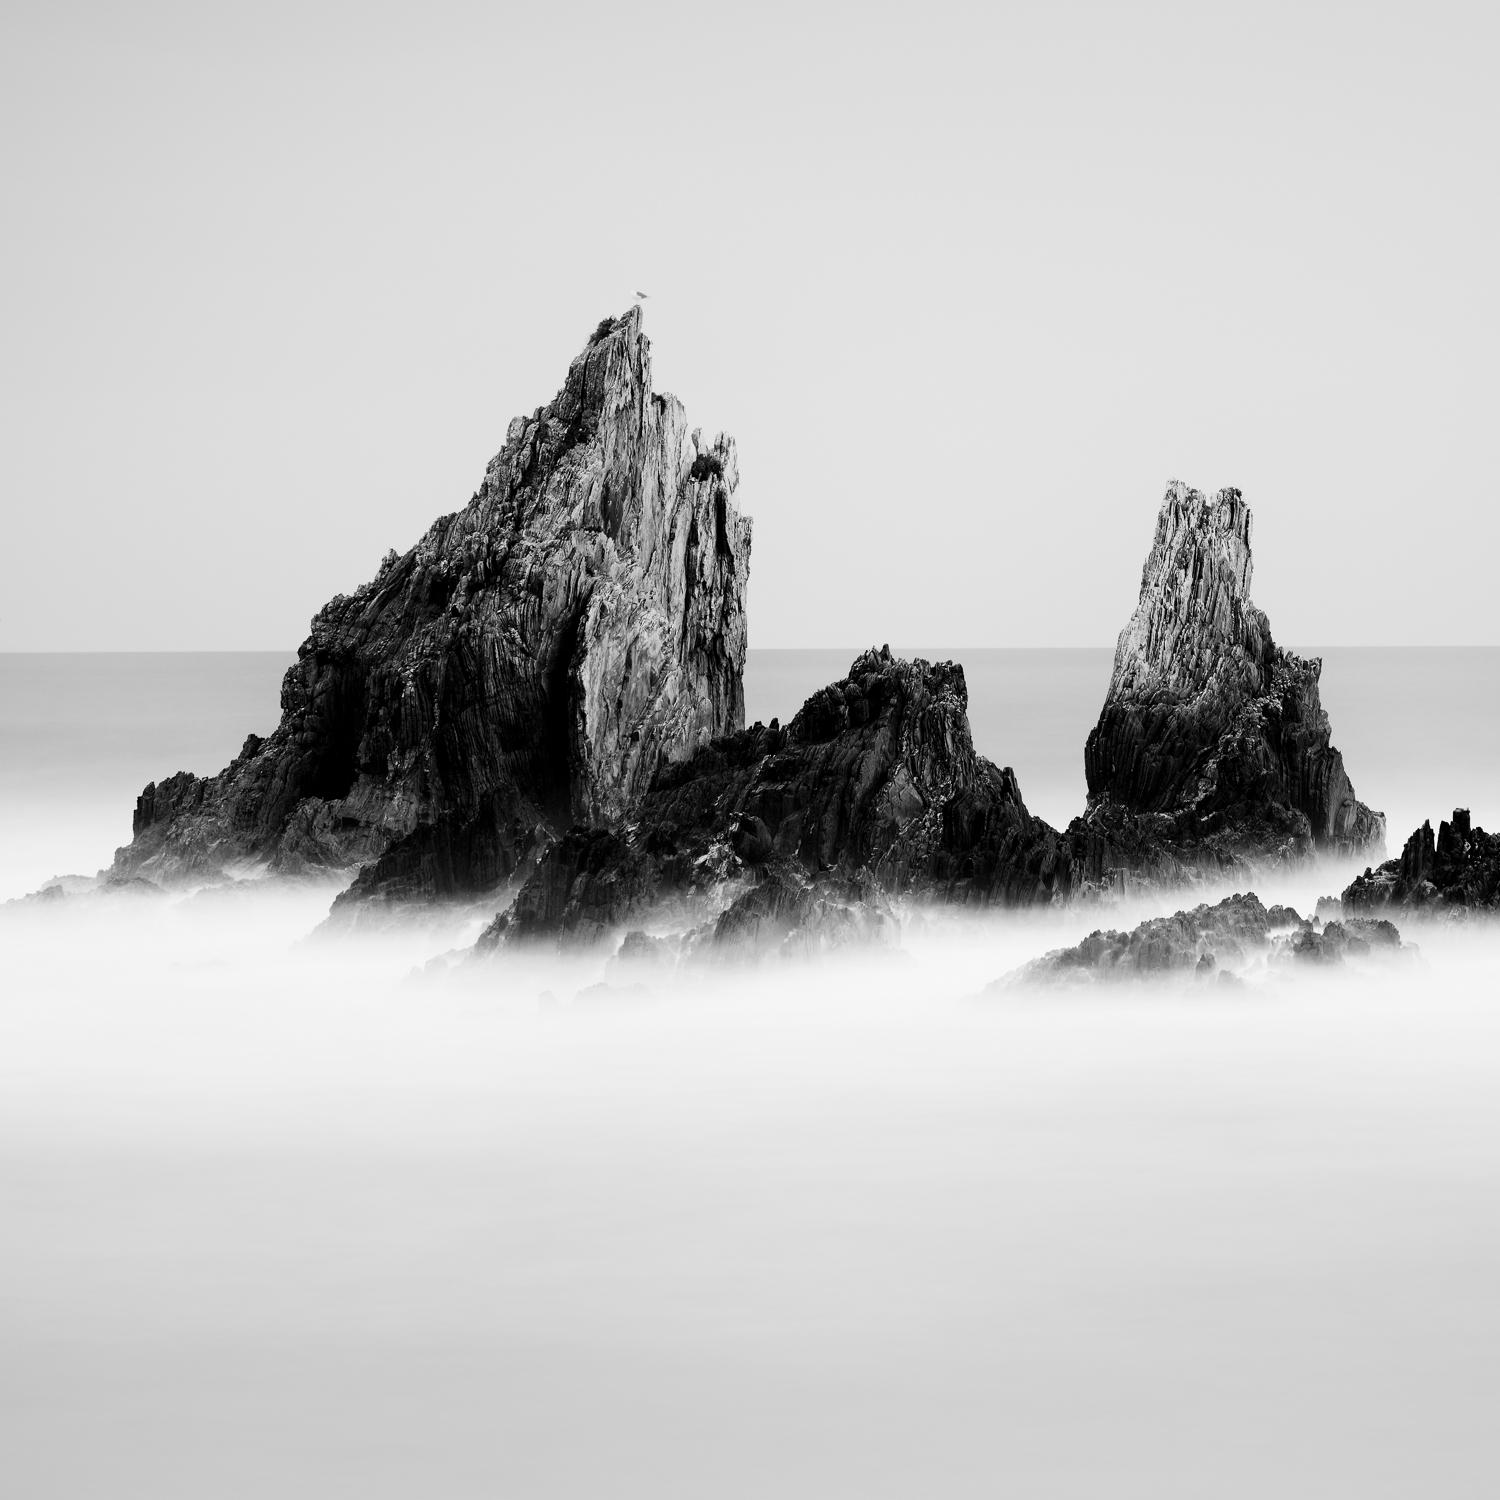 Black and white fine art landscape photography Gerald Berghammer. Archival Pigment Ink Print, Edition 1/7, signed, numbered, dated. Aluminum frame, matt black, natural white archival passepartout, anti-reflection glass, UV-protection 70, metal